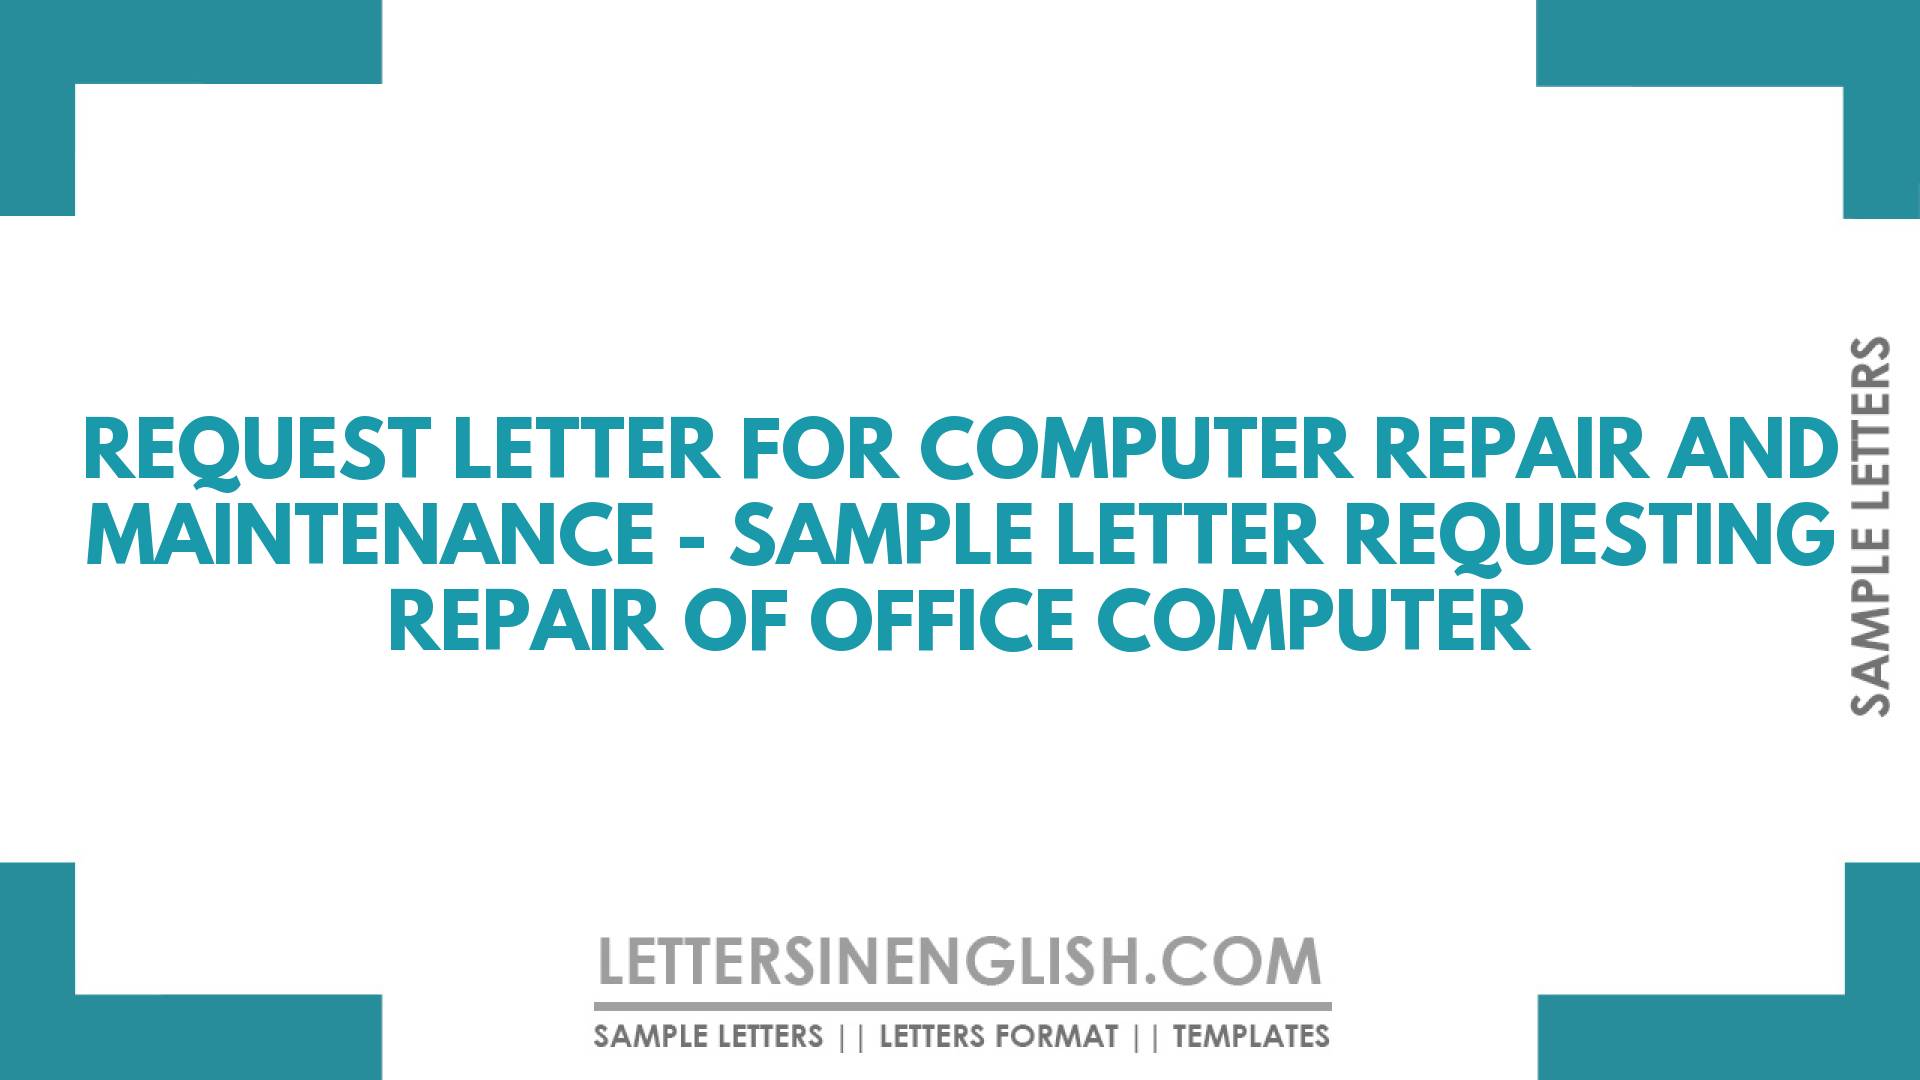 Request Letter for Computer Repair and Maintenance – Sample Letter Requesting Repair of Office Computer